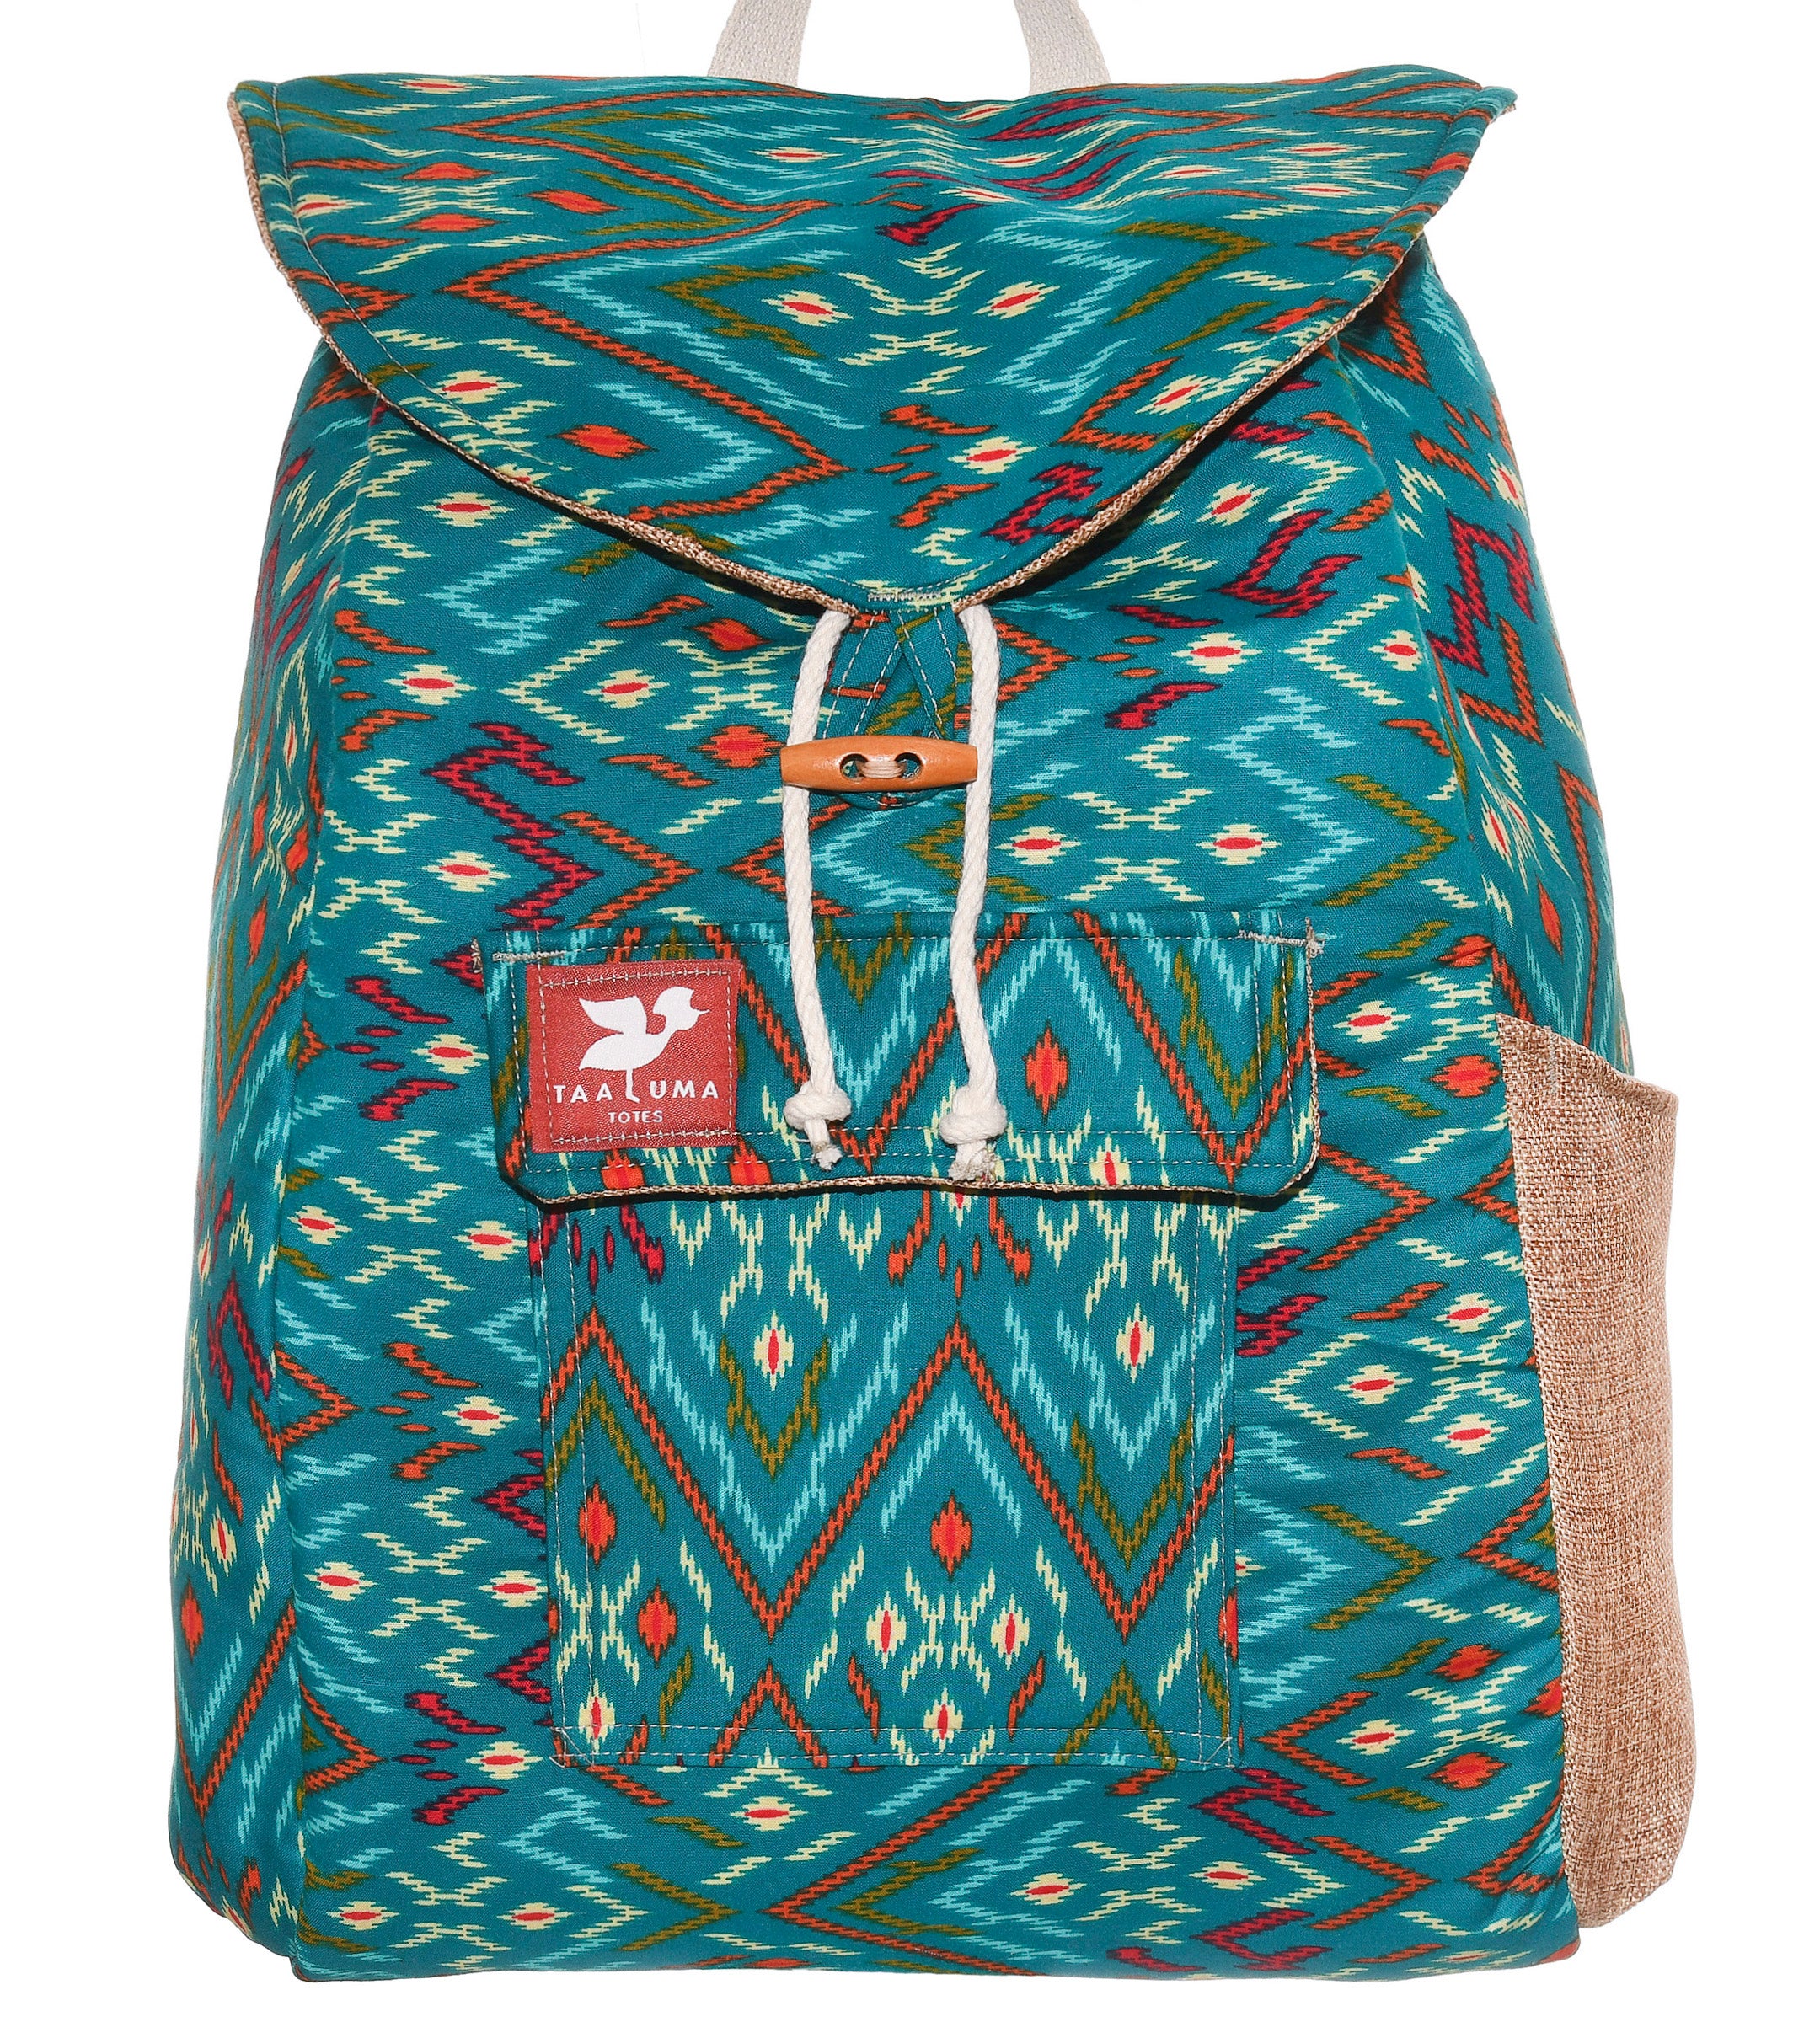 Indonesia Tote (by Carley Ryan)